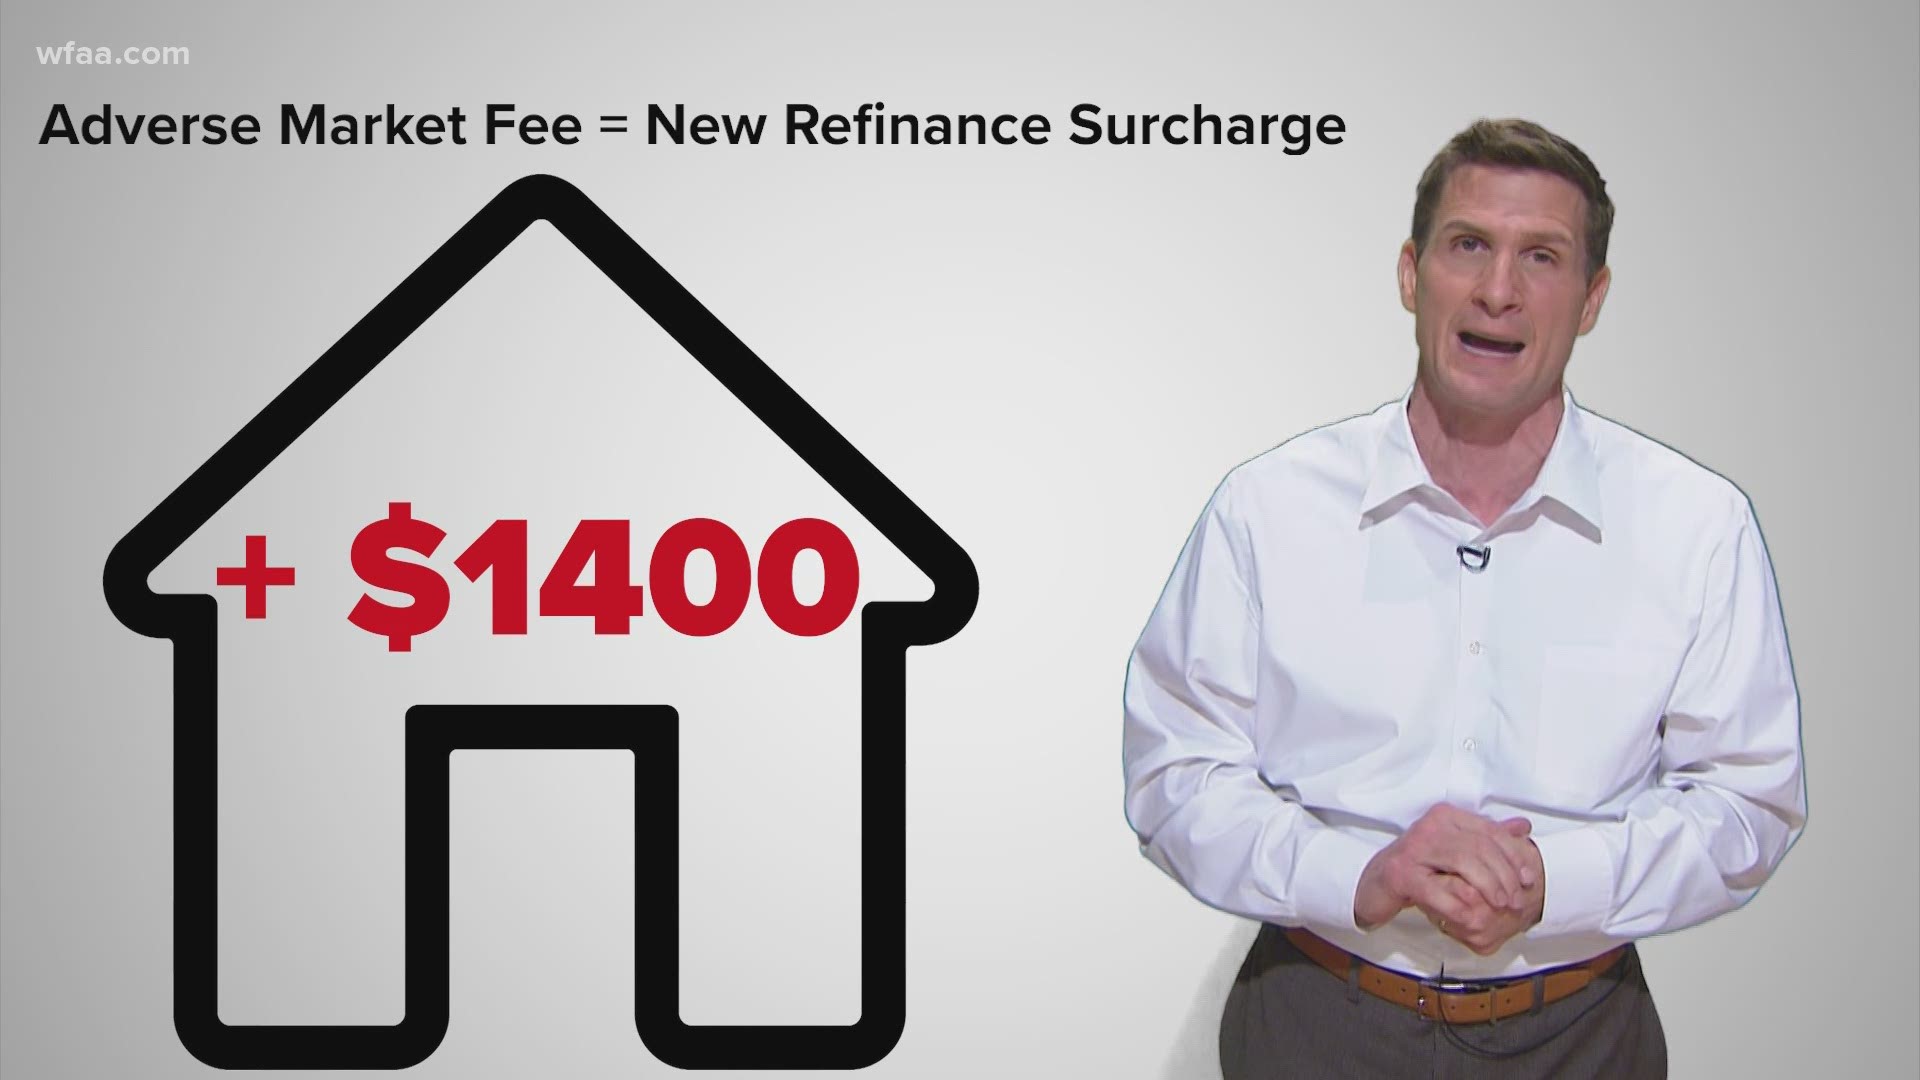 Some estimate the adverse market fee will add $1,400 to the cost of an average refinance.